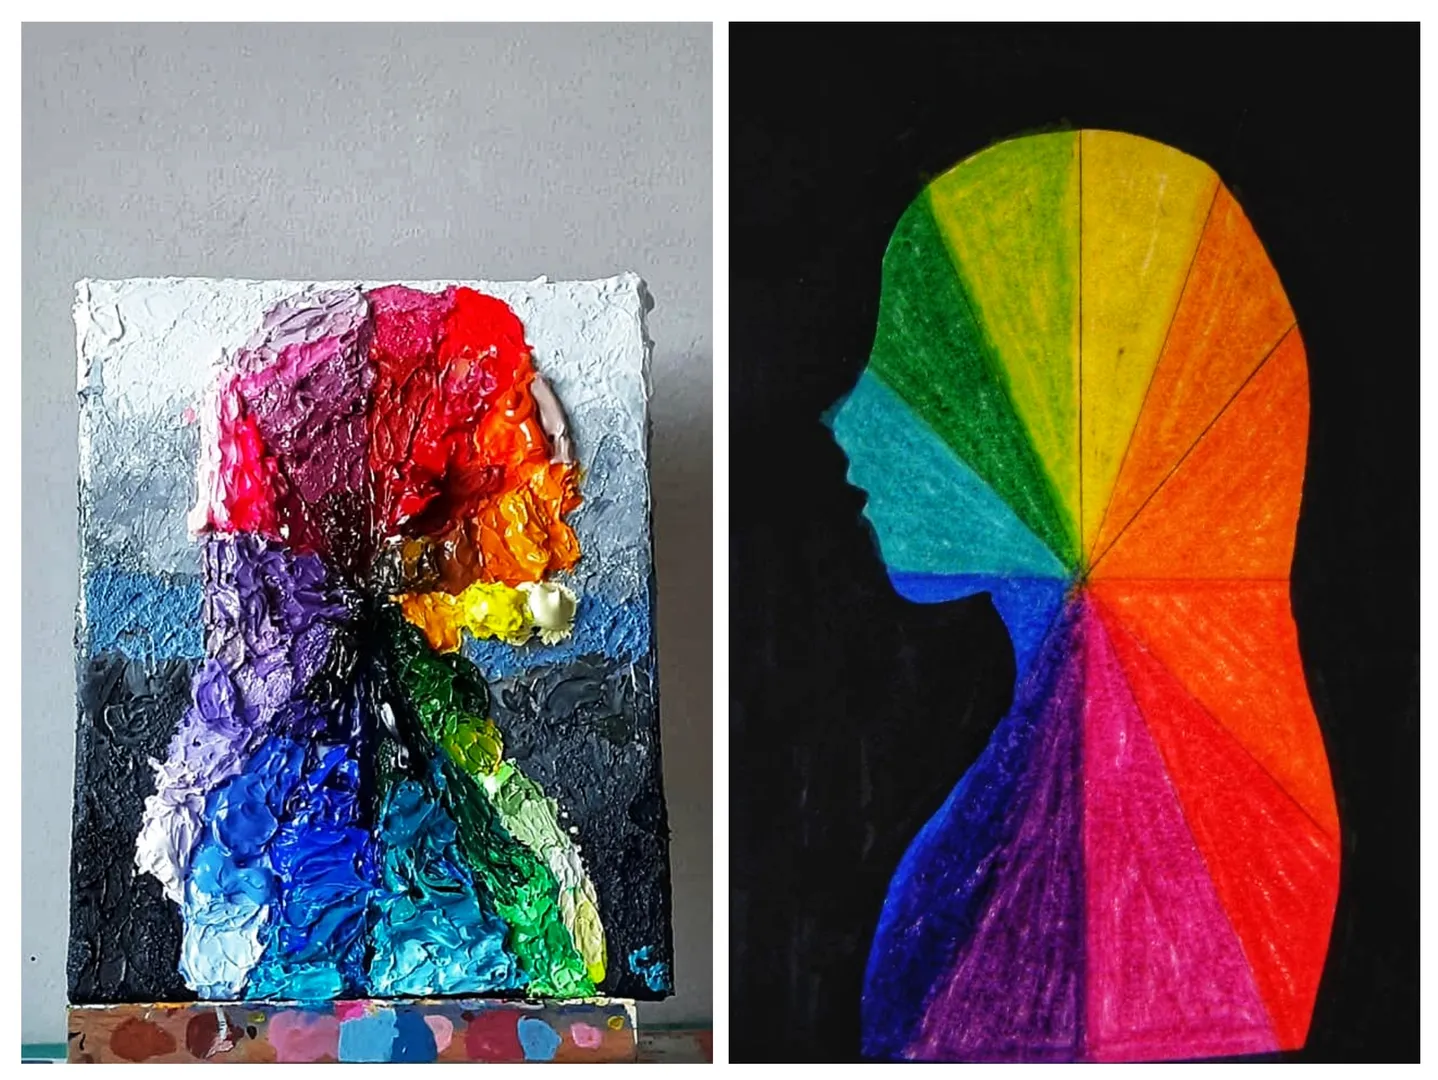 Guess what? I'm on #pinterest (link👇)

https://pin.it/fc3ArZp

Left:
Color Wheel Profile
2020
Acrylic on stretched canvas 
8" x 10"
SOLD 

Right:
A pin from my #pinterestboard "Art and Refs". Original source and link unknown. This is a drawing of a woman's profile colored with either crayons or colored pencils.

Why I loved trying this pin: I thought this was a clever way of reinterpreting the classic color wheel. According to the captioning on my Pinterest board, this was an exercise for school age children taking art classes and learning about color theory. I decided to tackle the same composition, but this time I treated it as an impasto painting 🖼 making the colors literally stand out and pop. If you look closely, I used several types of mediums that give the paint different textures and surfaces, allowing the painting to be multifaceted (like me 😉). 

It's been ages since I've last used Pinterest (I forgot how addicting and visually overwhelming it can be). I'll post and share work (and corresponding Pins) more often as I can, especially since I'm a fine art undergrad student!

—Cheri (Cher Bear)

#pinterestinspired #pinterestideas #pinterestart #pinterestartist #impasto #impastopainting #colortheory #colorwheel #colorwheelchallenge #pinterestphoto #pinteresting #colorwheelproject #texturedpainting #paintinginacrylic #profilepainting #profilepaintings #paintingoftheday #pinoftheday #paintingduringwork #paintingatwork #fineartmajor #kcpainter #multidisciplinaryartist 